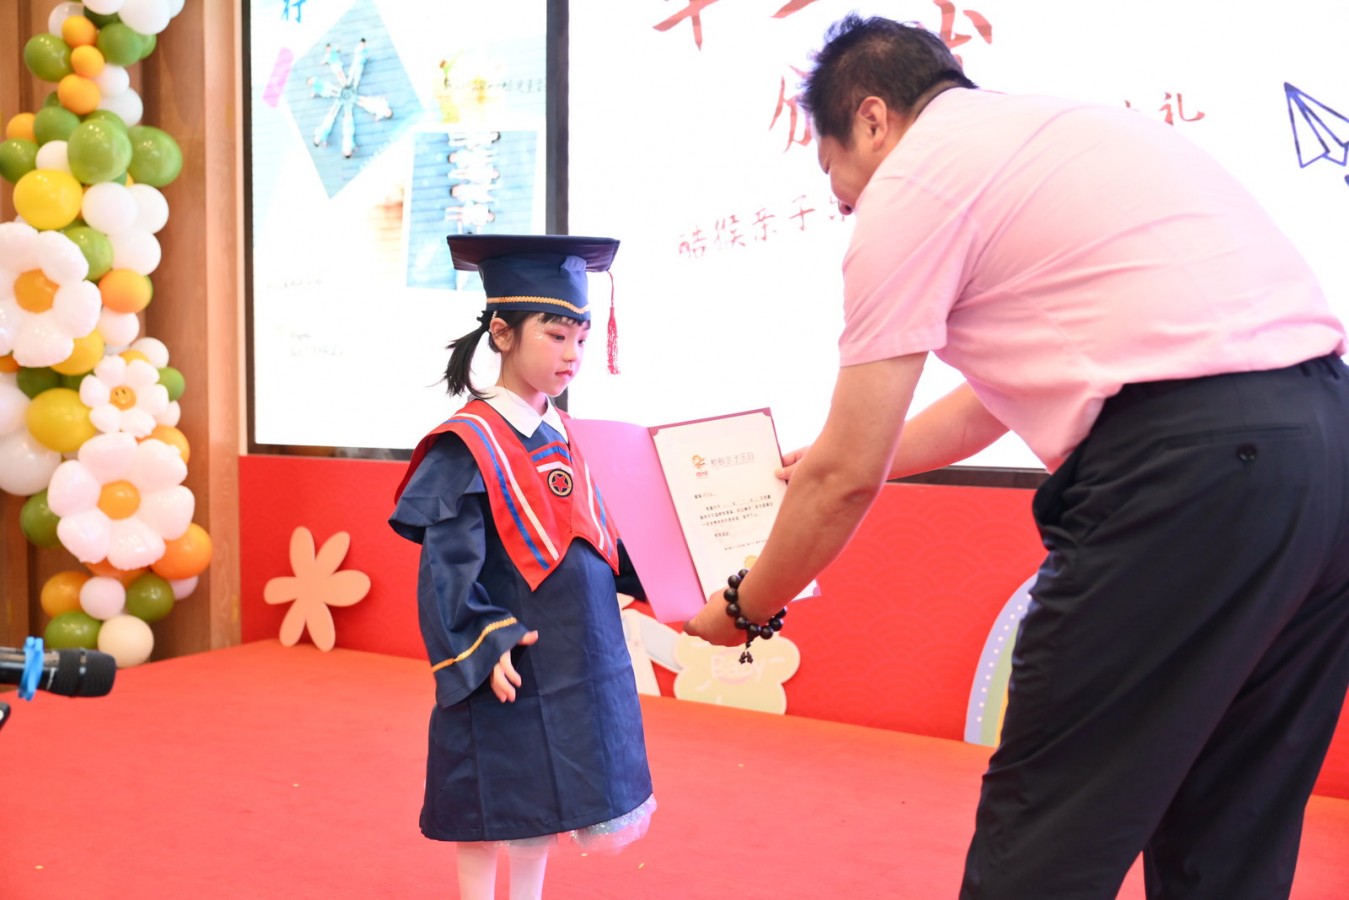 An Unforgettable Graduation Ceremony for Kids Successfully Held In PHNIX Cool Monkey Kindergarten